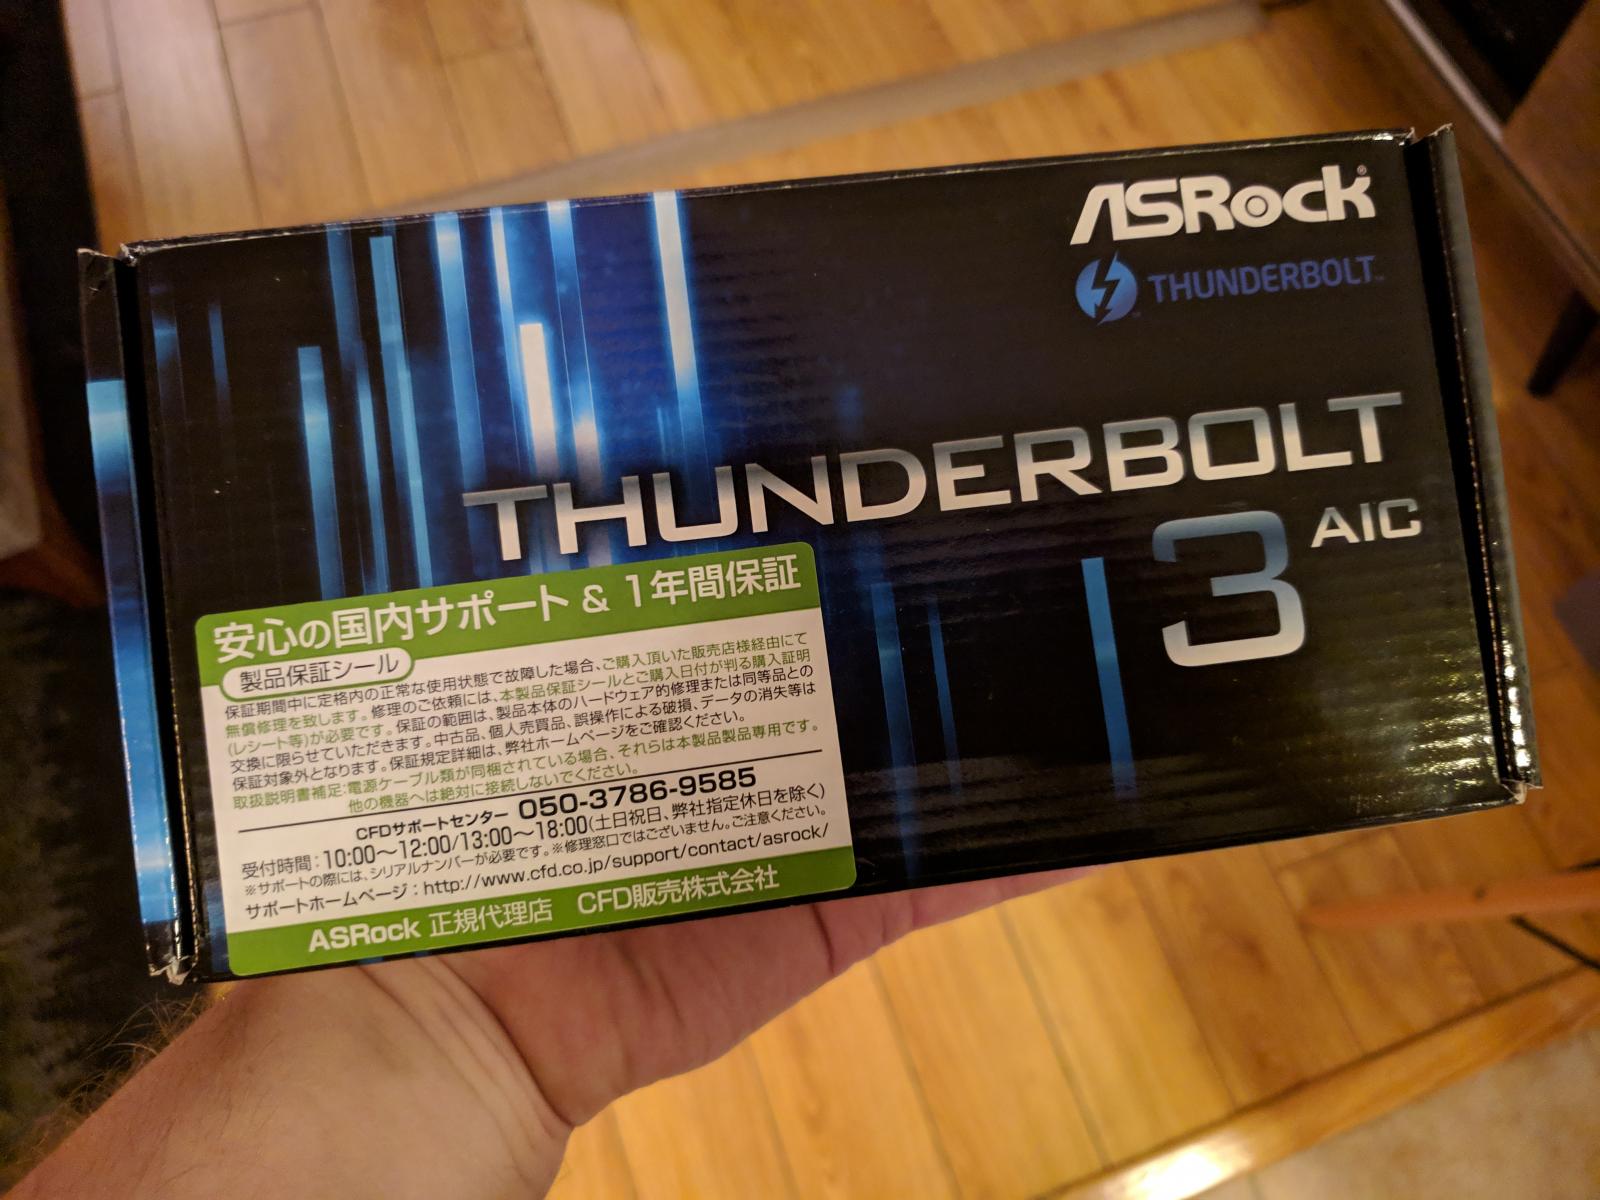 For sale ASRock Thunderbolt 3 Add-in Card